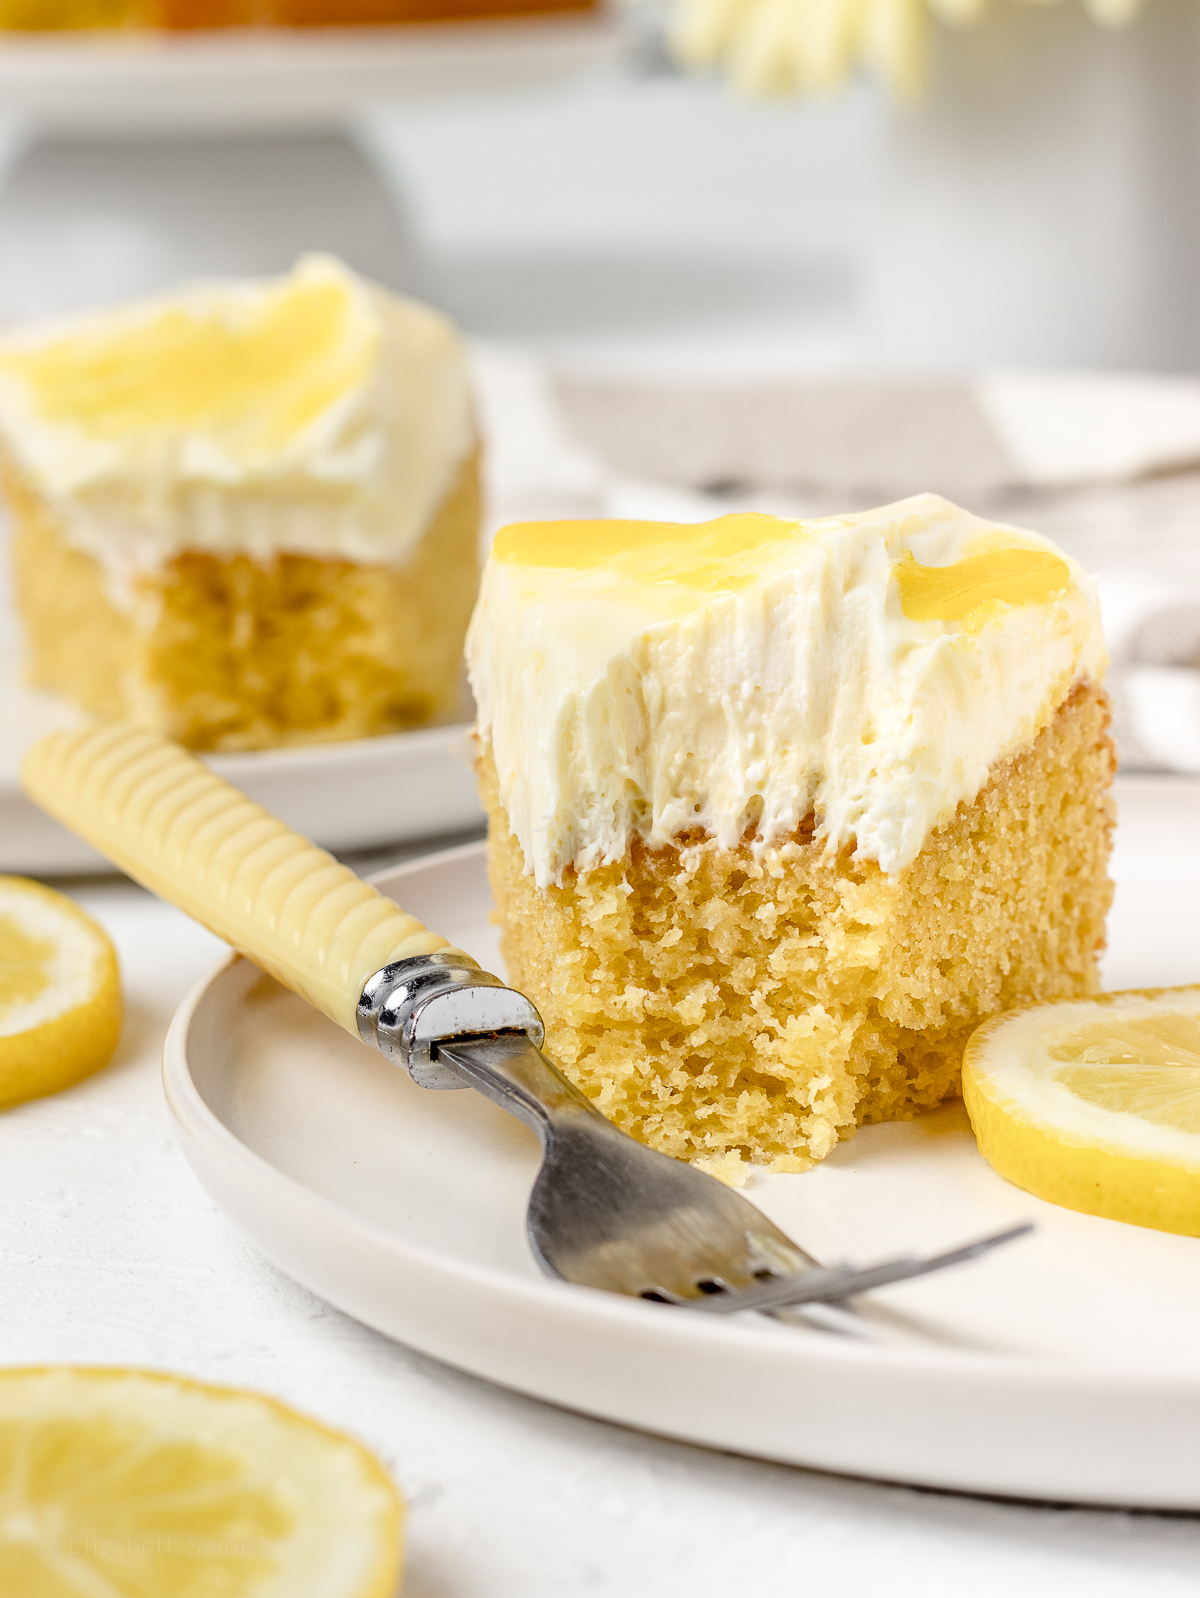 Two slices of cake with bites taken out of them and lemon slices on the side.